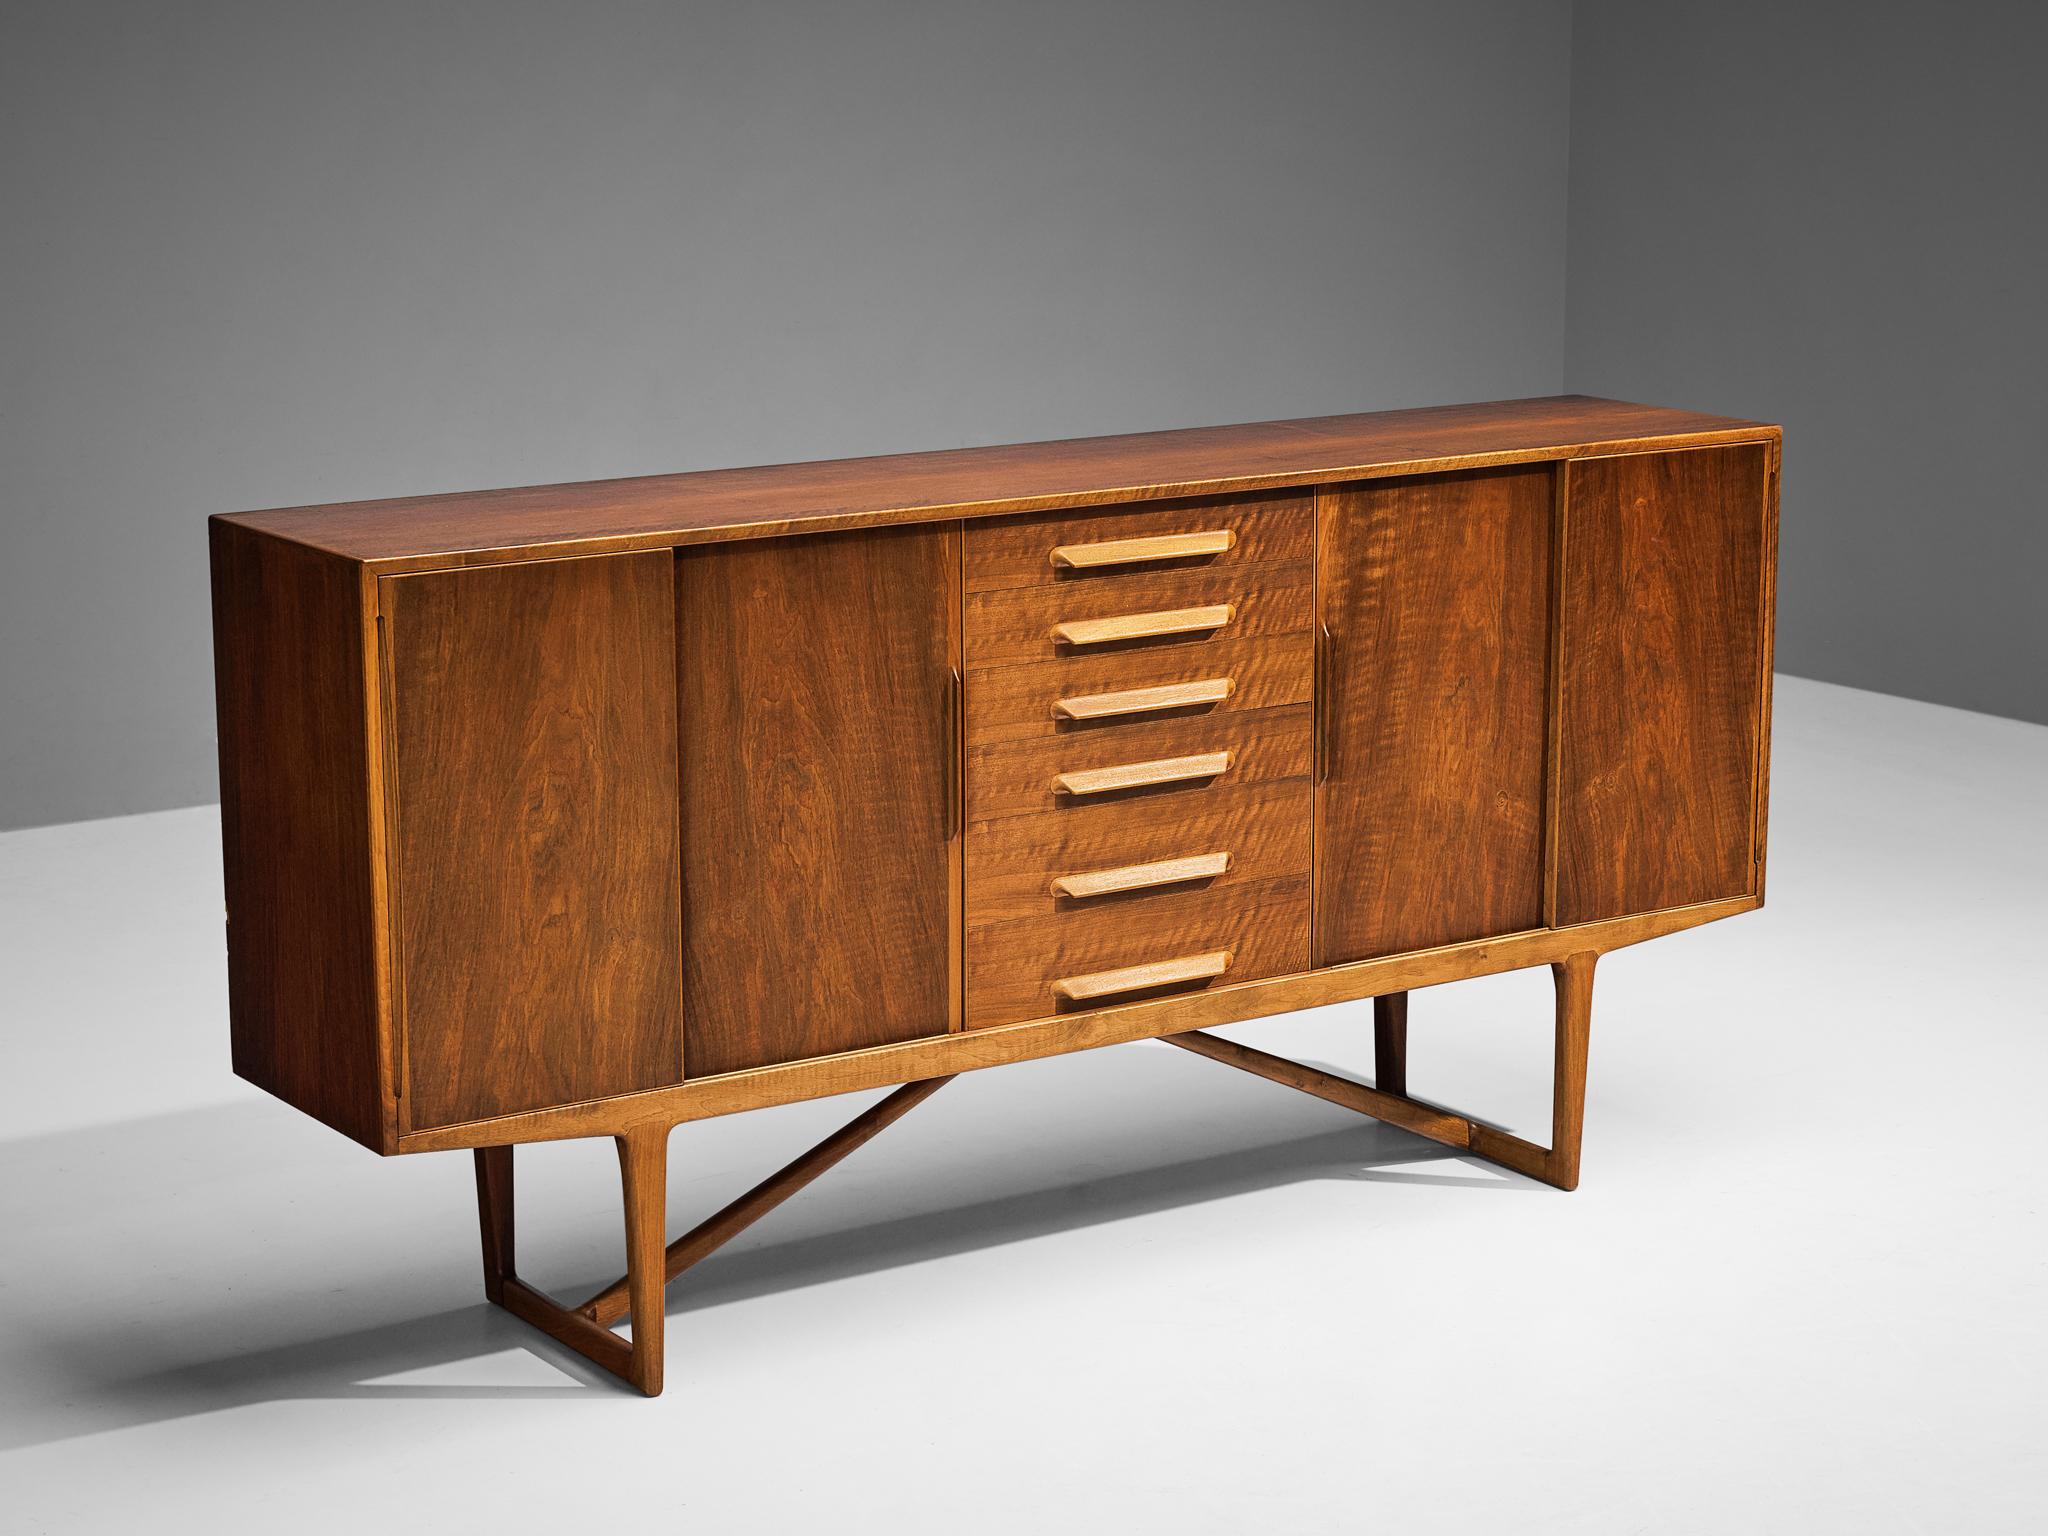 Kurt Østervig, sideboard, walnut, Denmark, 1950s

Sophisticated walnut sideboard by Kurt Østervig. The quality of this piece is reflected in the very well made seamless wood joints and door grips, as well as the warm grain of the walnut veneer. The